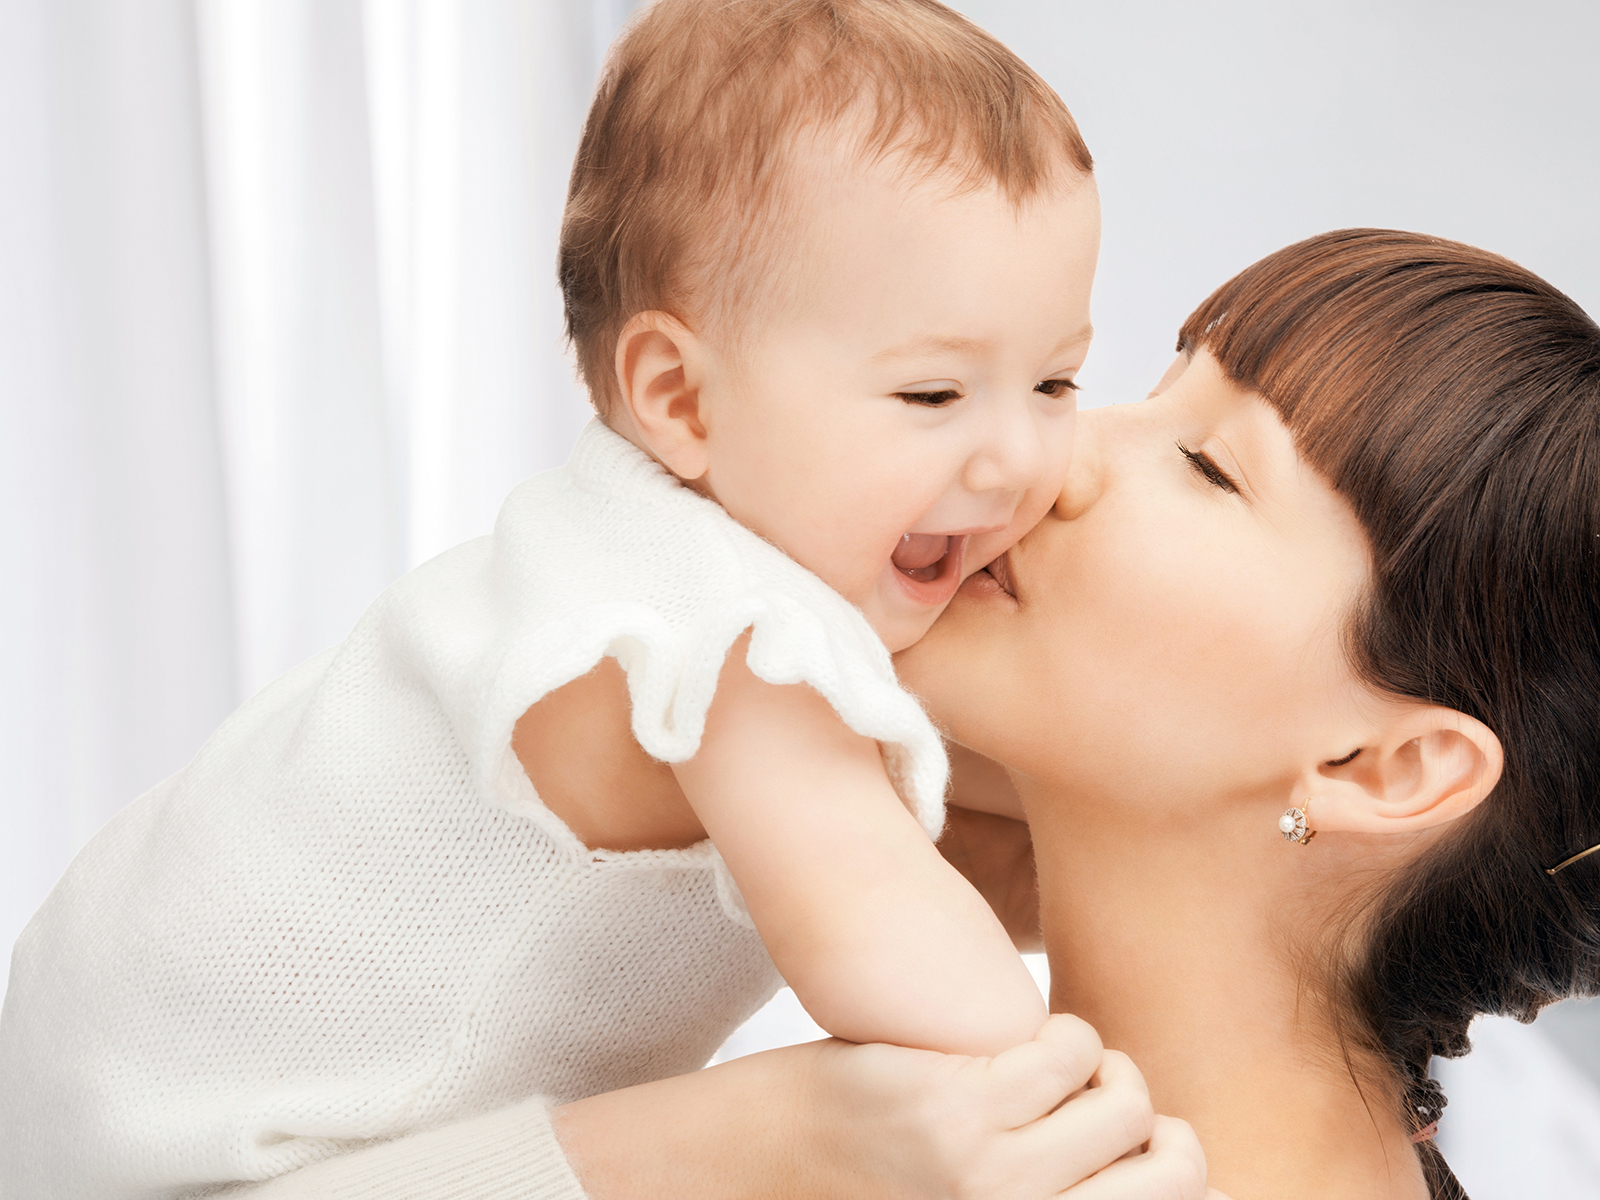 Things Nursing Moms Should Know About Dental Health